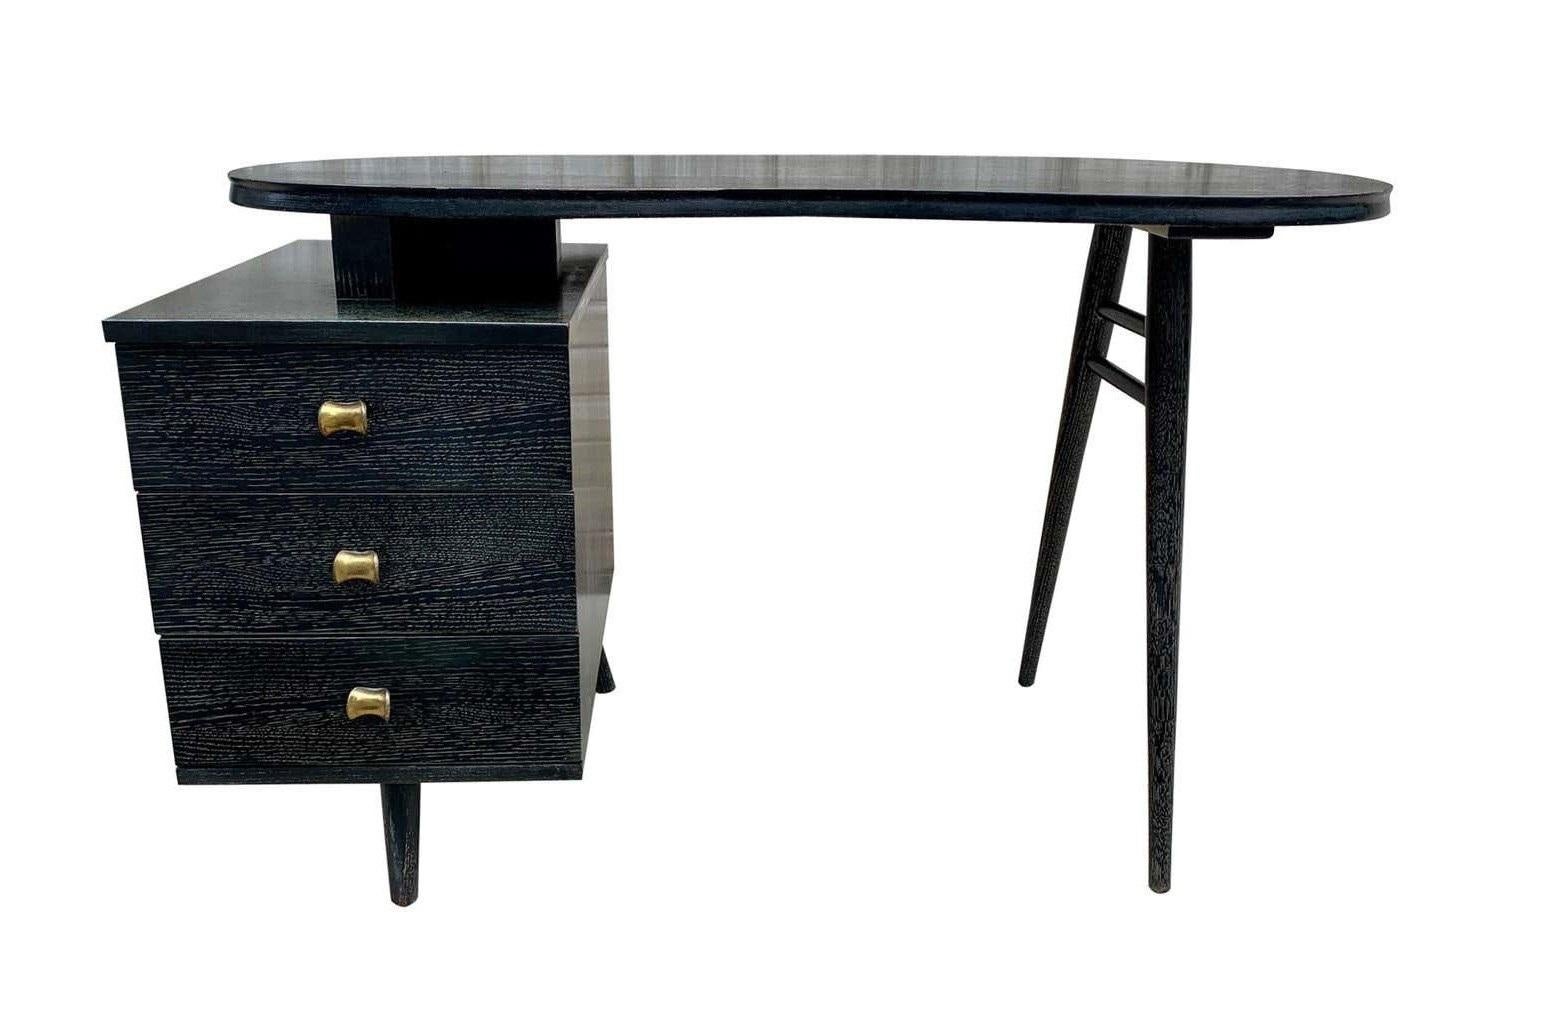 A truly a unique piece! Stunning and extremely rare Art Deco desk designed by Gilbert Rohde, circa 1940. The desk is uniquely designed with architectural lines. The heavy kidney-form top floating above three drawers with brass pulls and turned